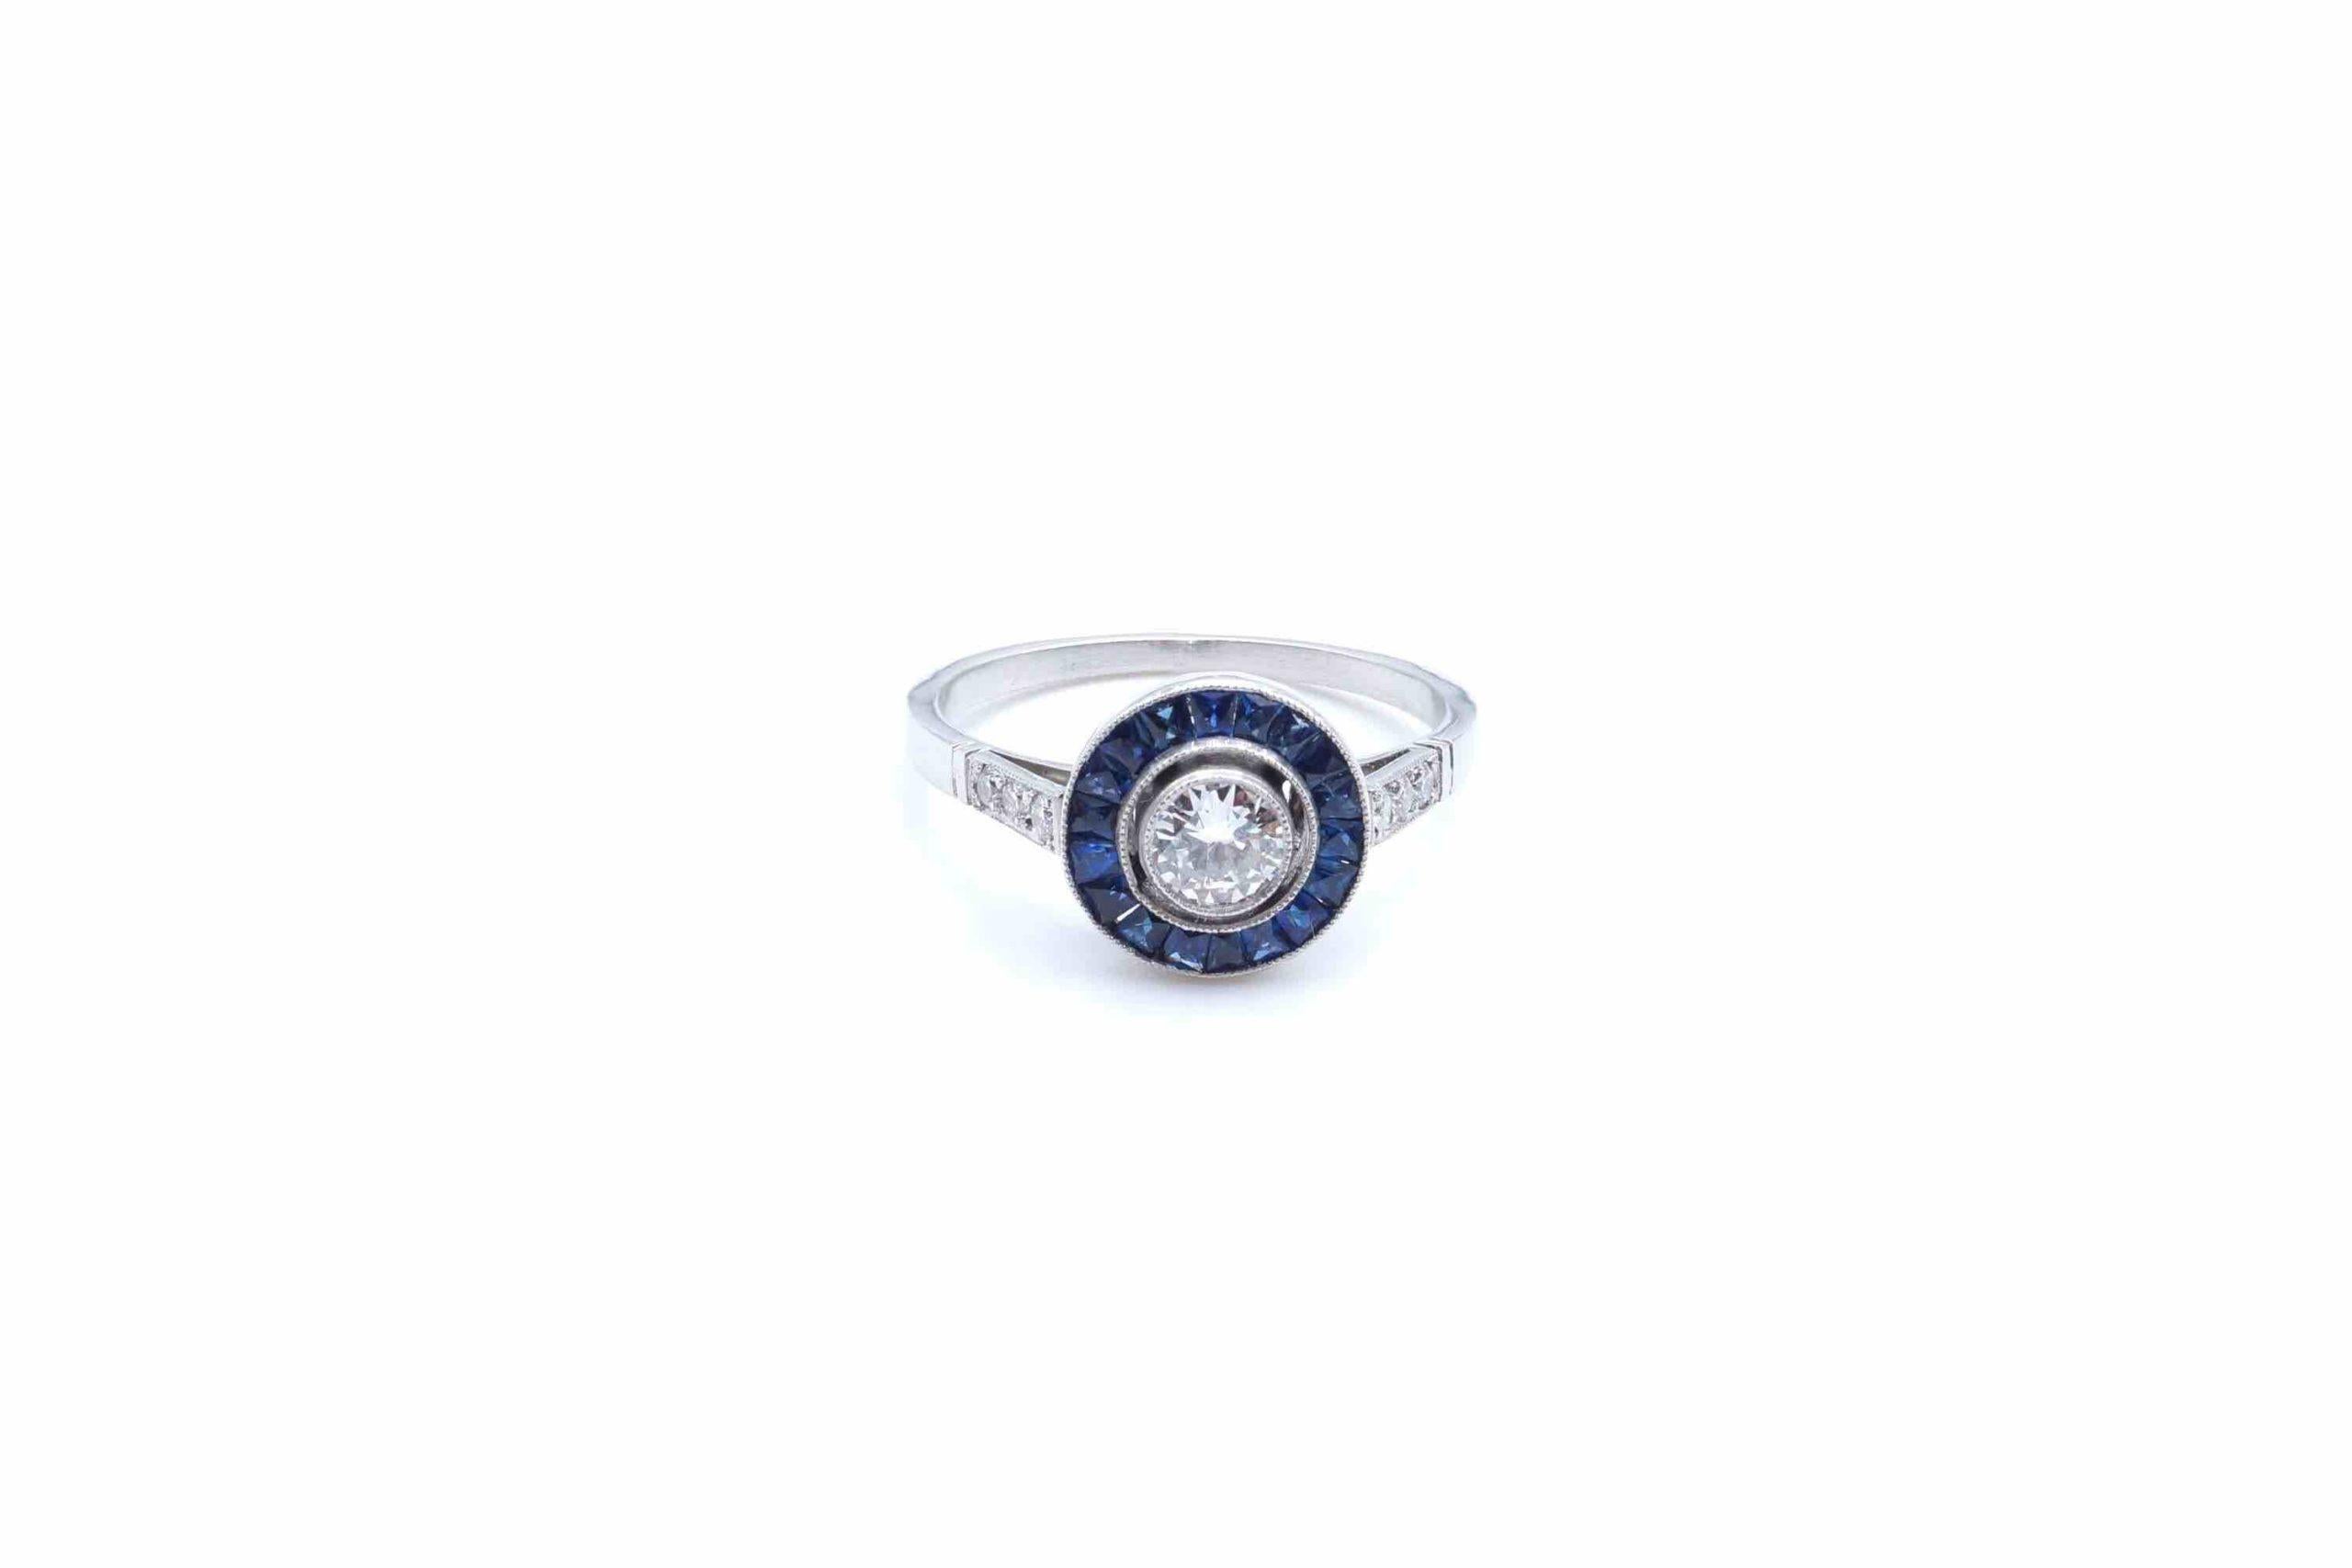 Stones: Brilliant cut diamond of 0.30 carat,
calibrated sapphires and diamonds for a total weight of 0.06 carat.
Material: Platinum
Dimensions: 9mm diameter
Weight: 3.3g
Size: 53 (free sizing)
Certificate
Ref. : 24519